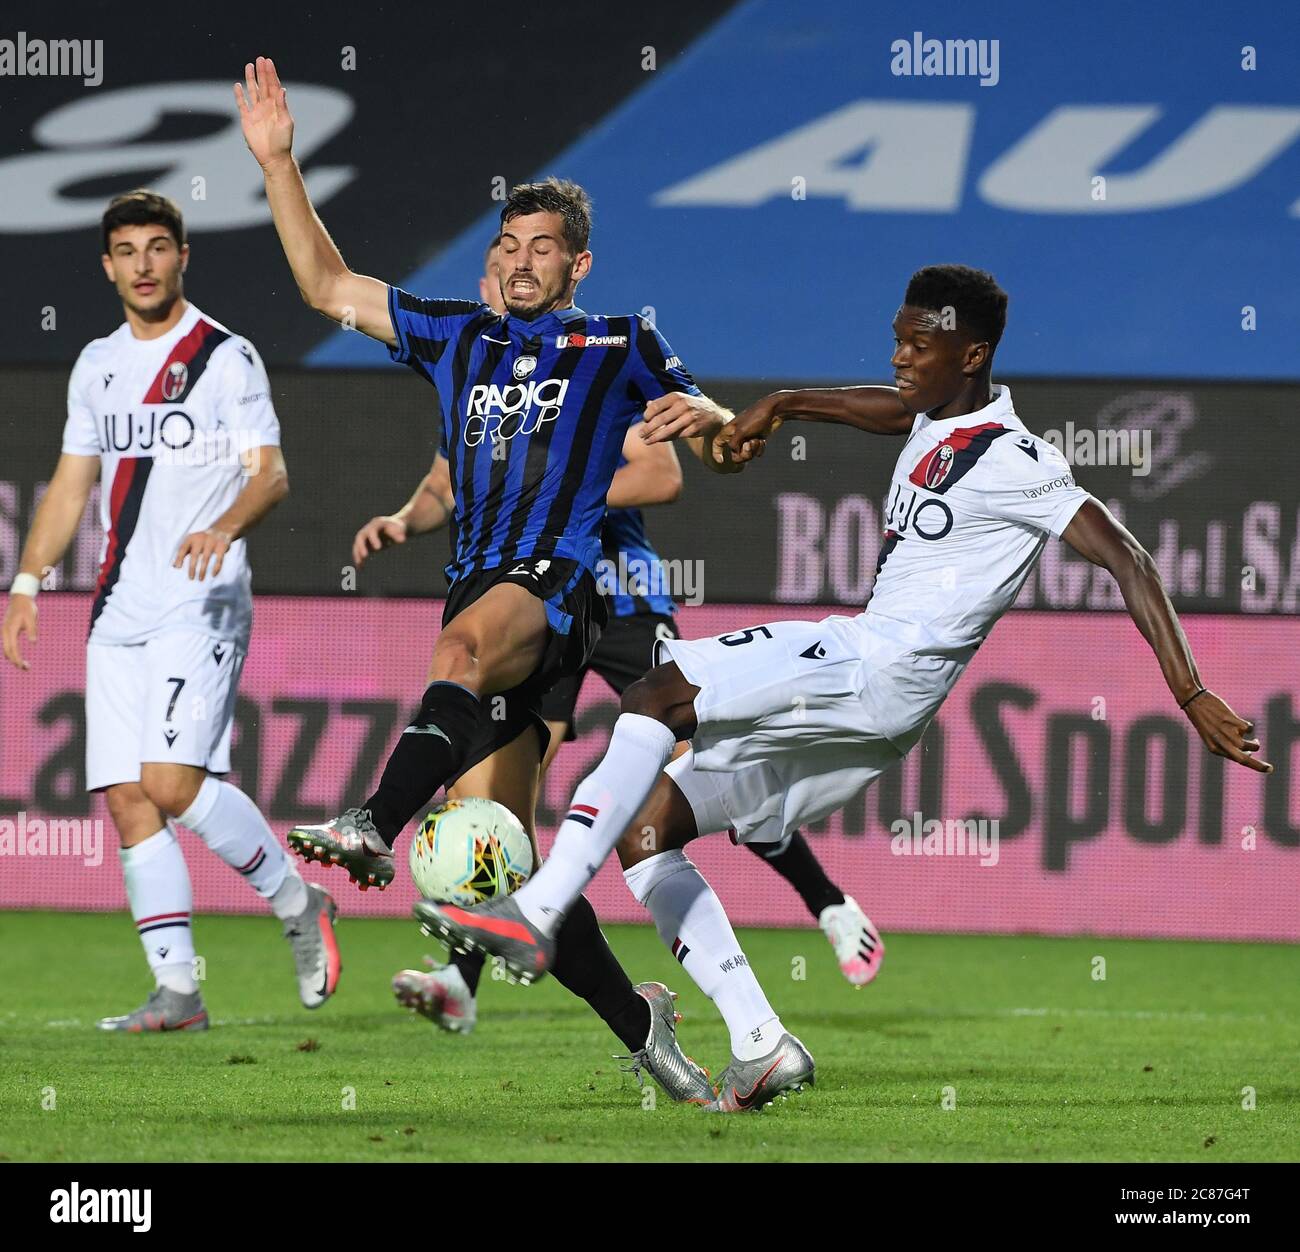 Bergamo. 22nd July, 2020. Atalanta's Remo Freuler (C) vies with Bologna's Ibrahima Mbaye (R) during a Serie A football match in Bergamo, Italy, July 21, 2020. Credit: Xinhua/Alamy Live News Stock Photo